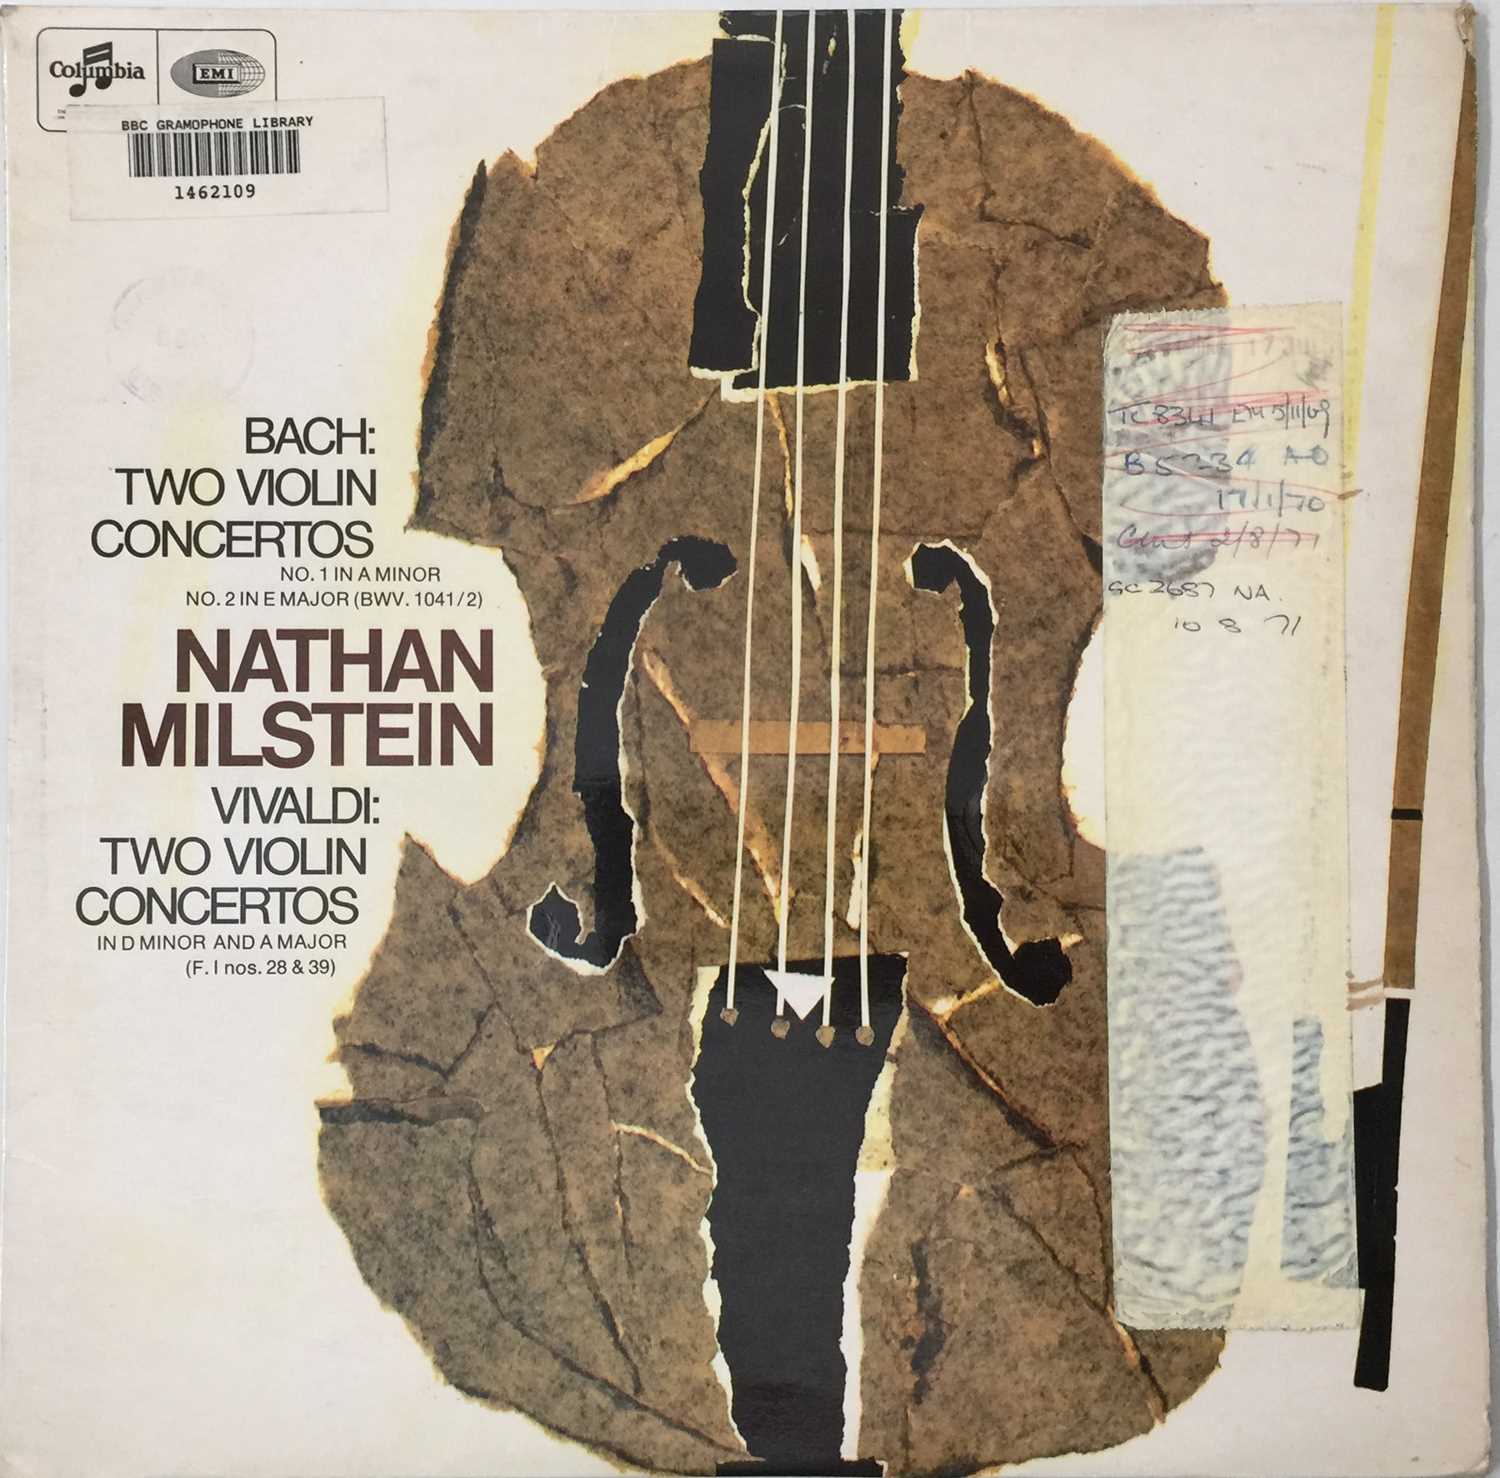 NATHAN MILSTEIN - BACH TWO VIOLIN CONCERTOS LP (ORIGINAL UK STEREO RECORDING - COLUMBIA SAX 5285) - Image 2 of 5